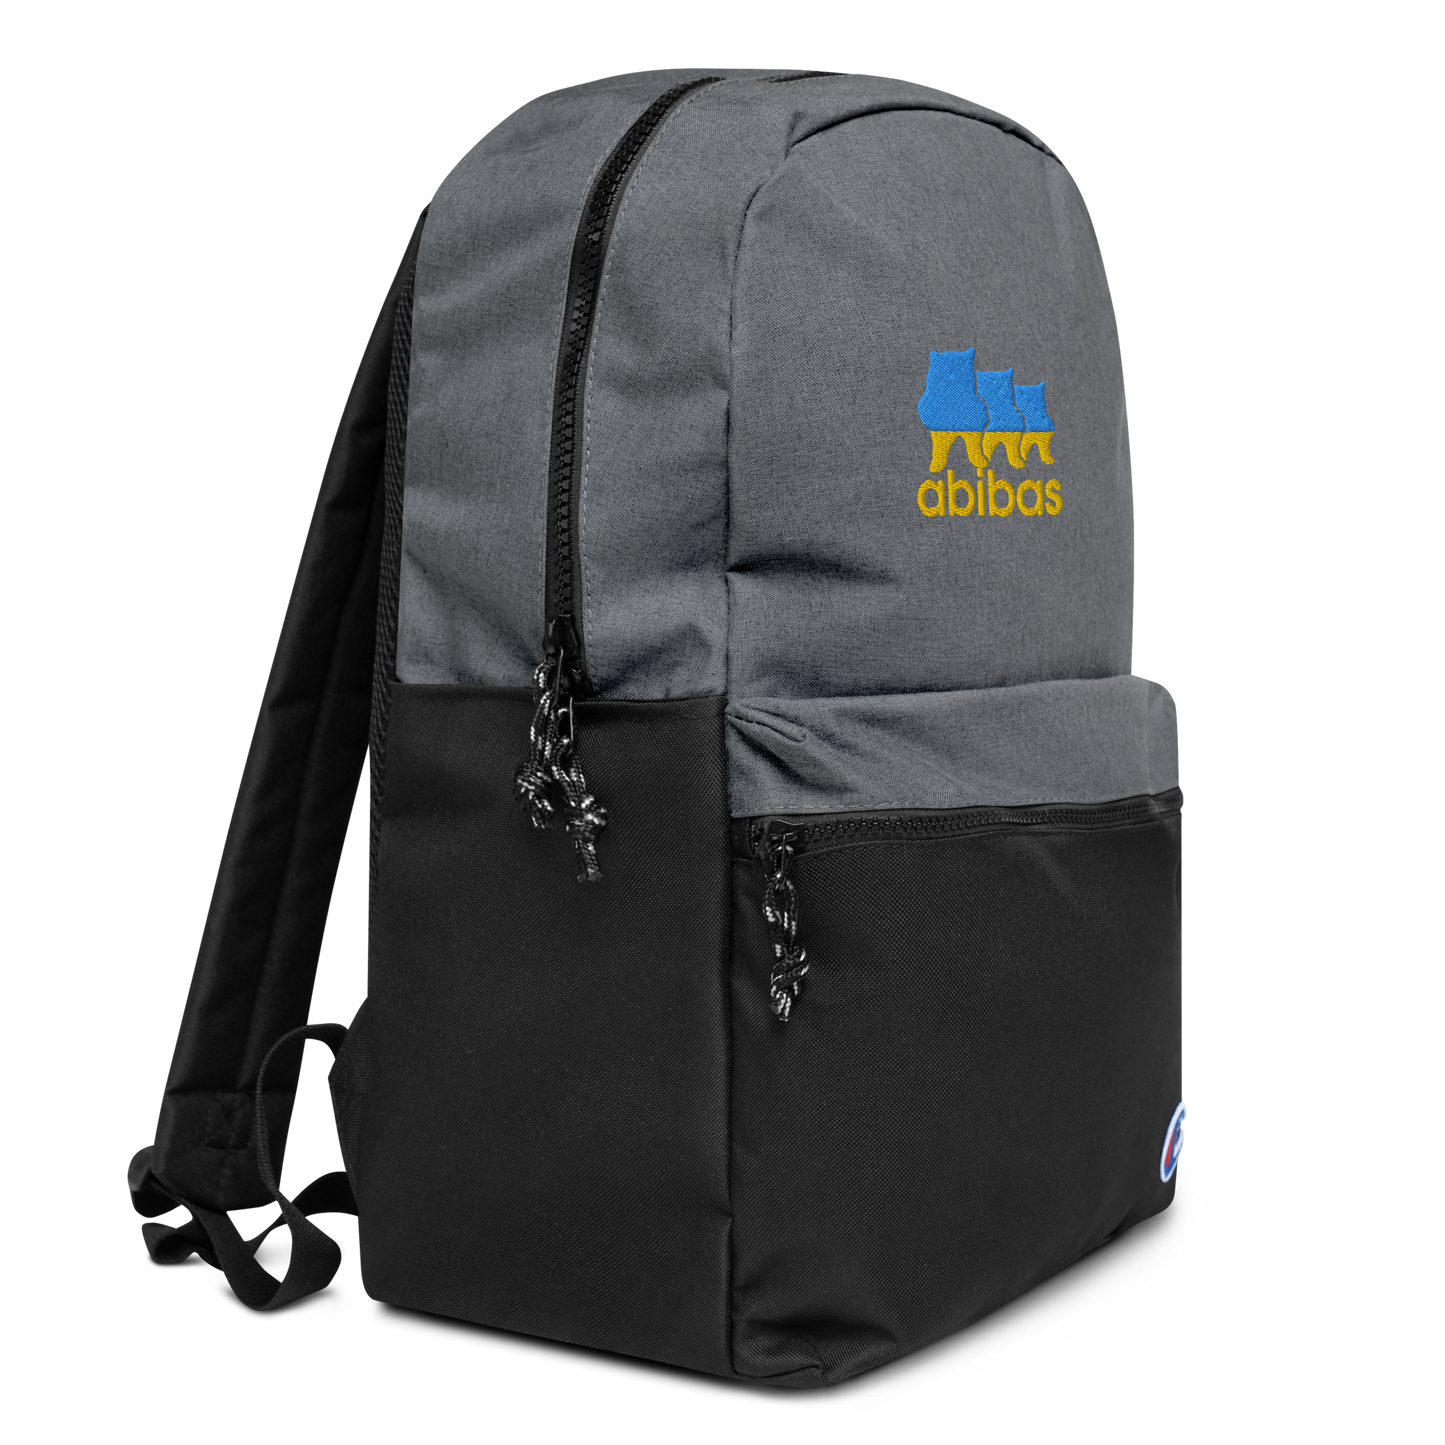 NAFO Abibas Embroidered Champion Backpack